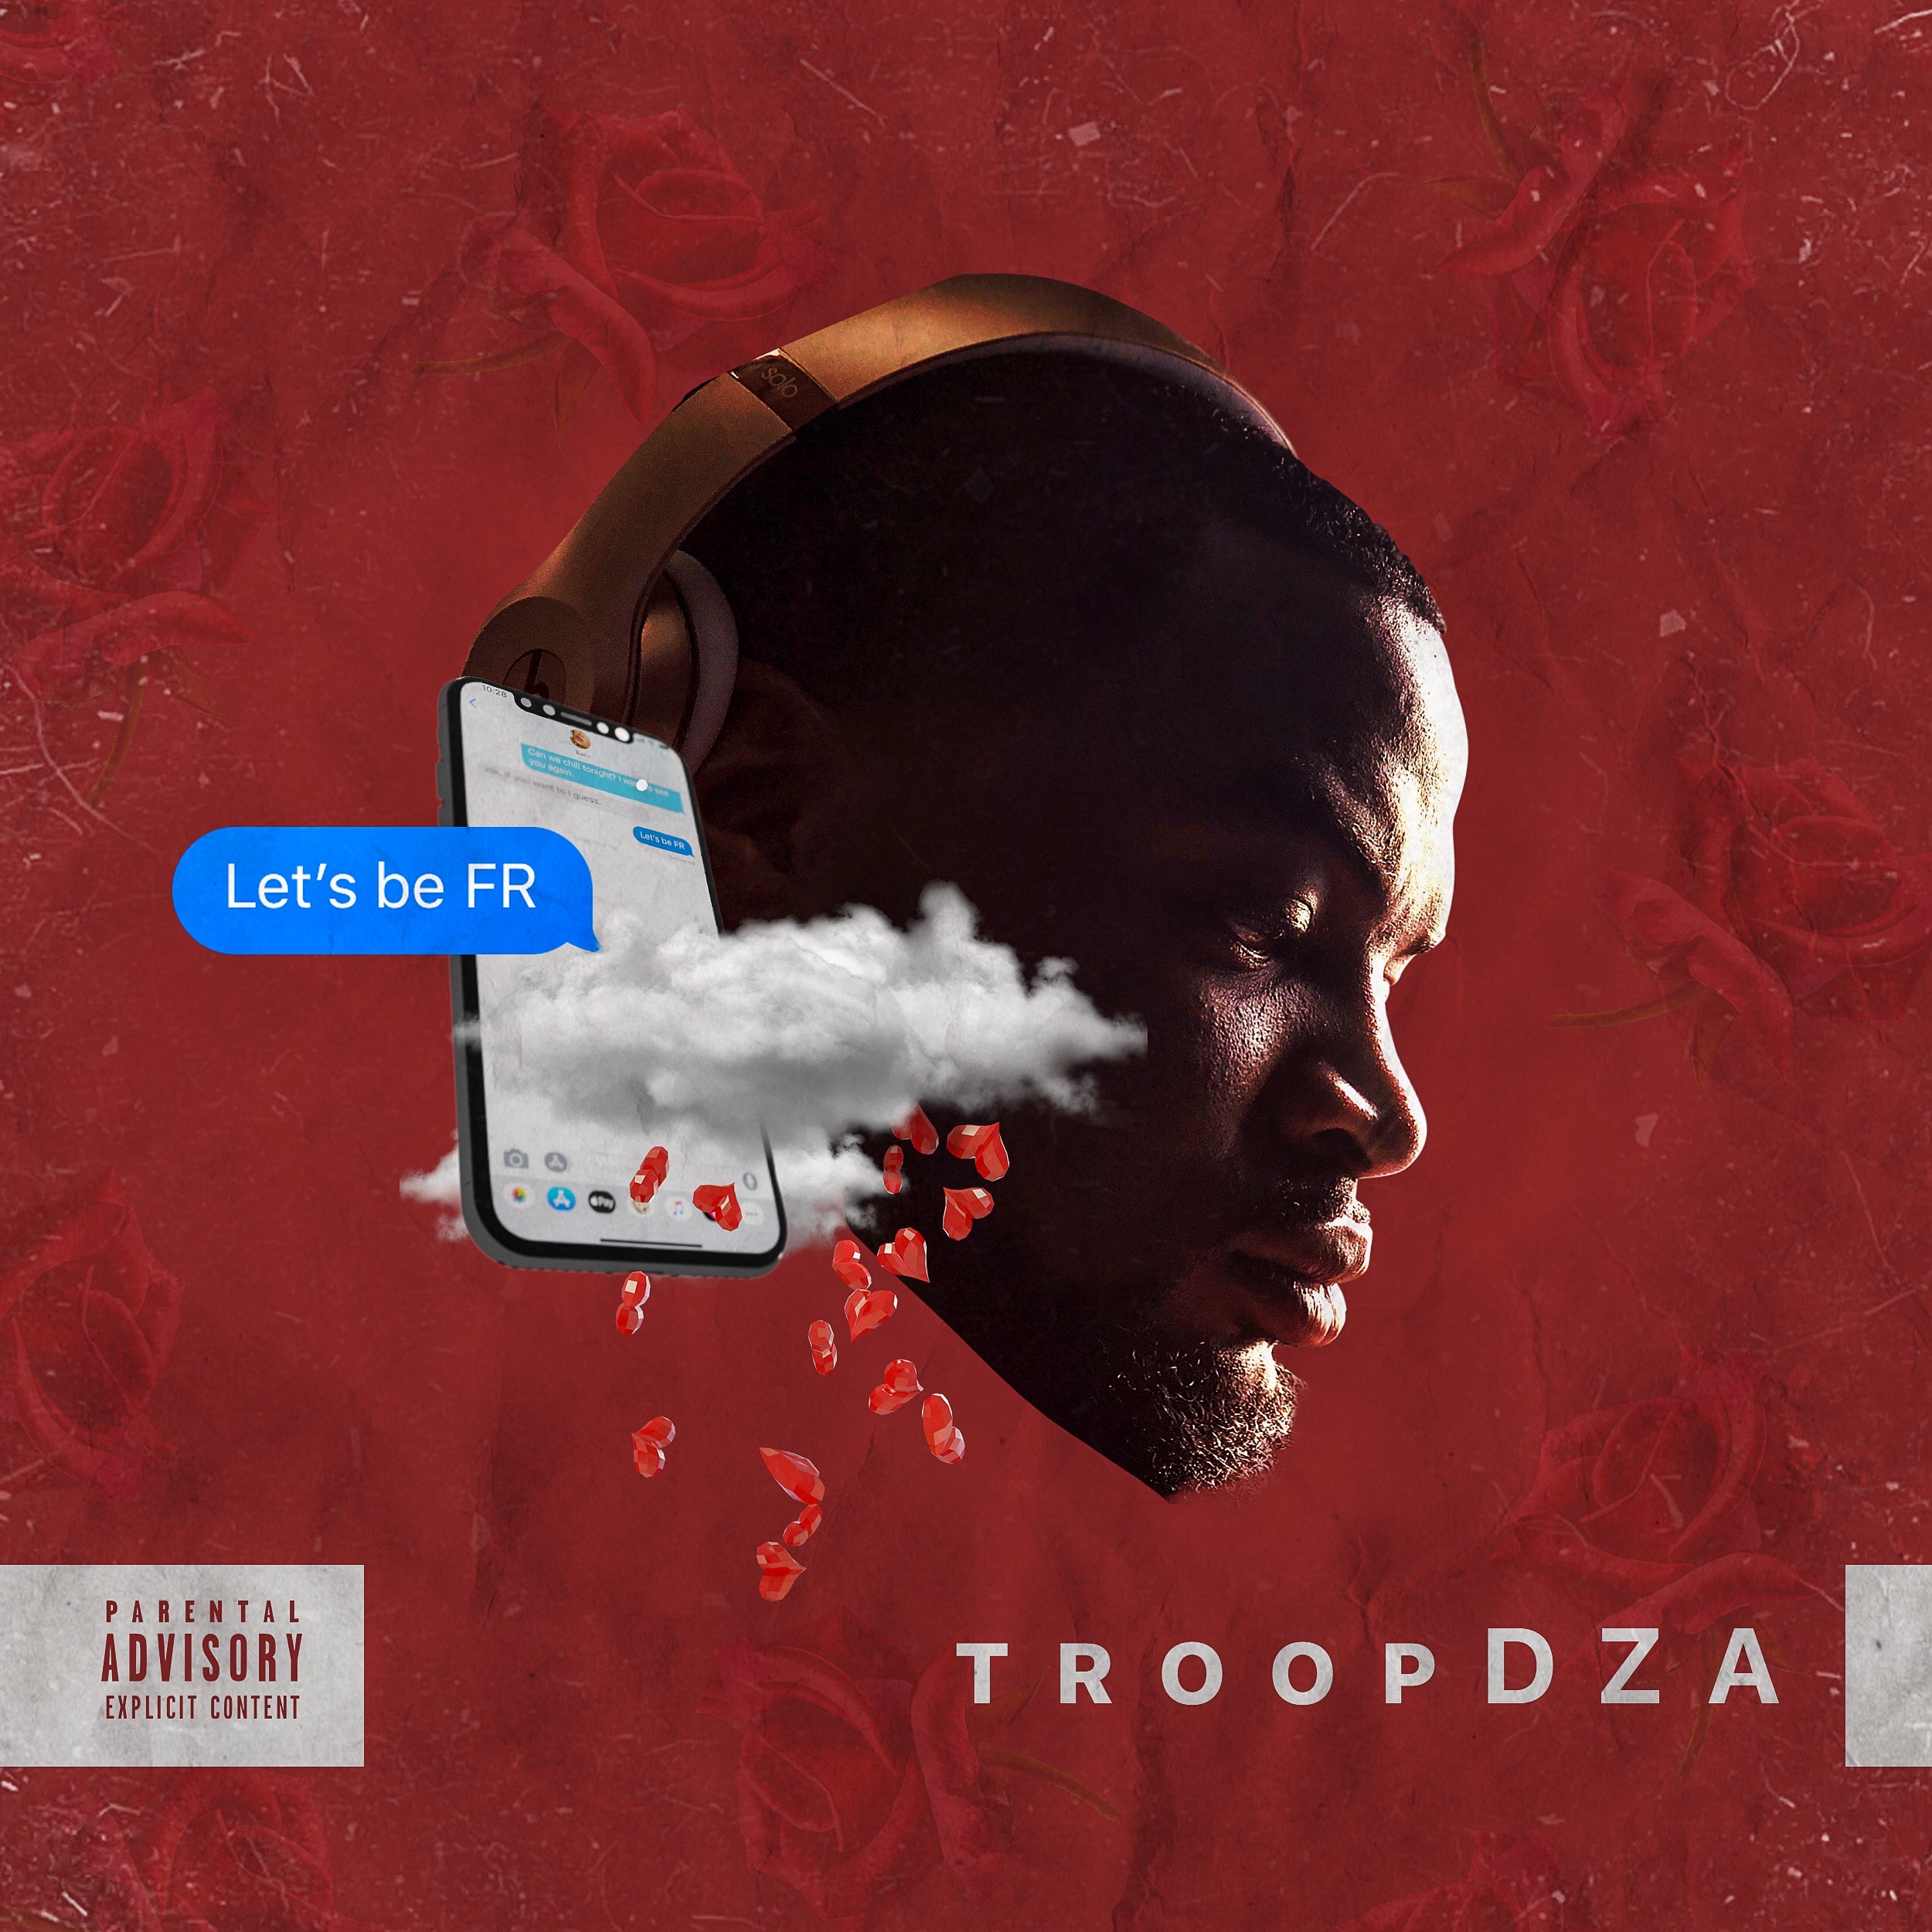 Troop DZA searches for the Truth in a relationship with “Let’s Be FR” @troopsc